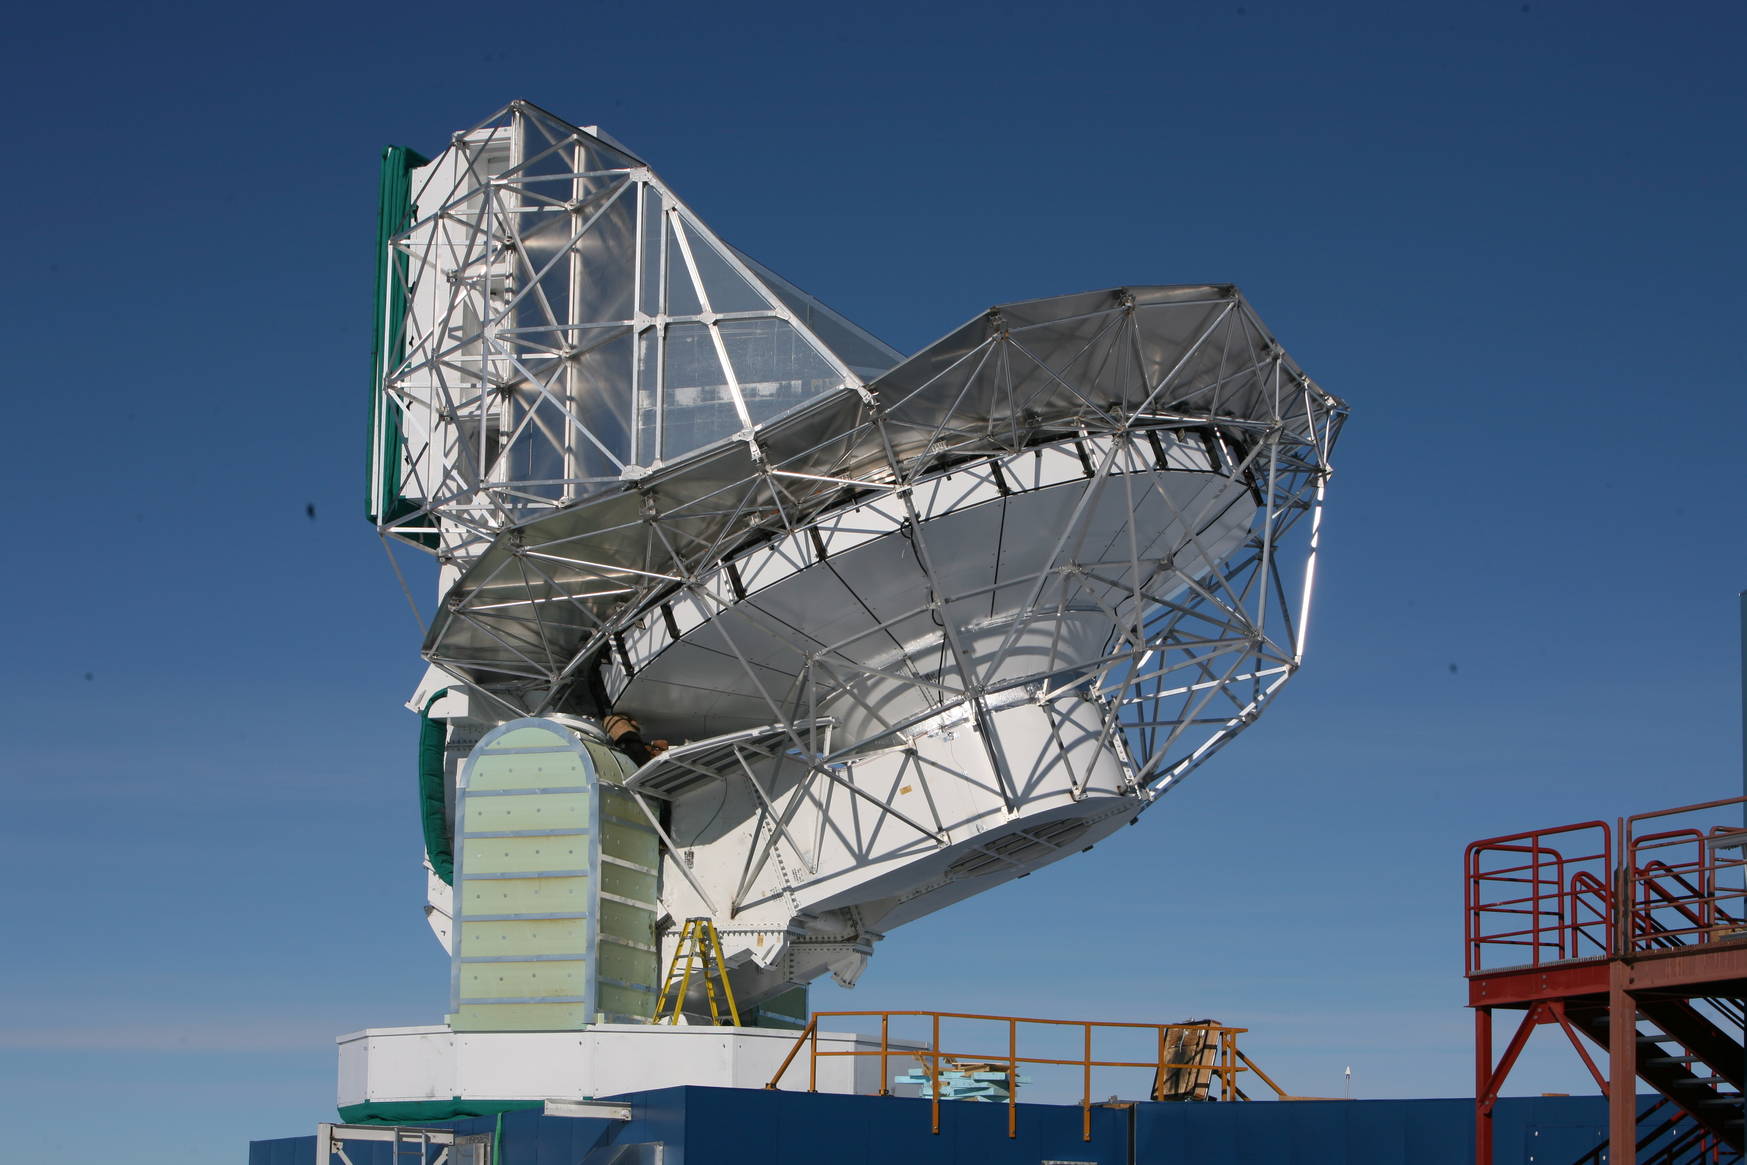 The telescope is huge! Find the person working on greasing its elevation axis for comparison. The big box in the top left (with the green bottom edge) is the receiver cabin where we will mount the new camera, once it is ready. 